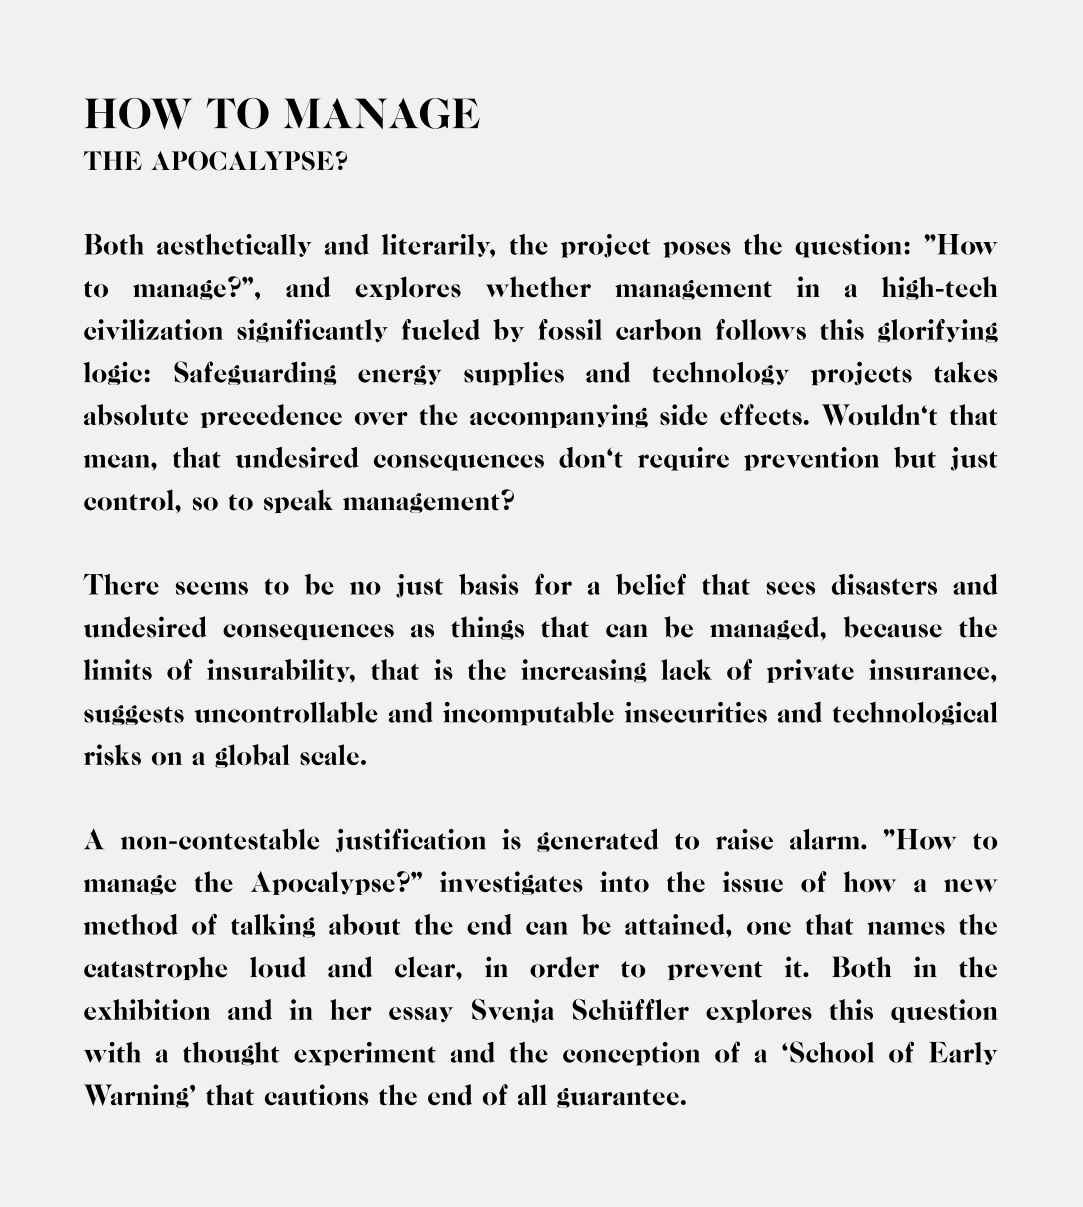 Summing up “How to manage the Apocalypse?”